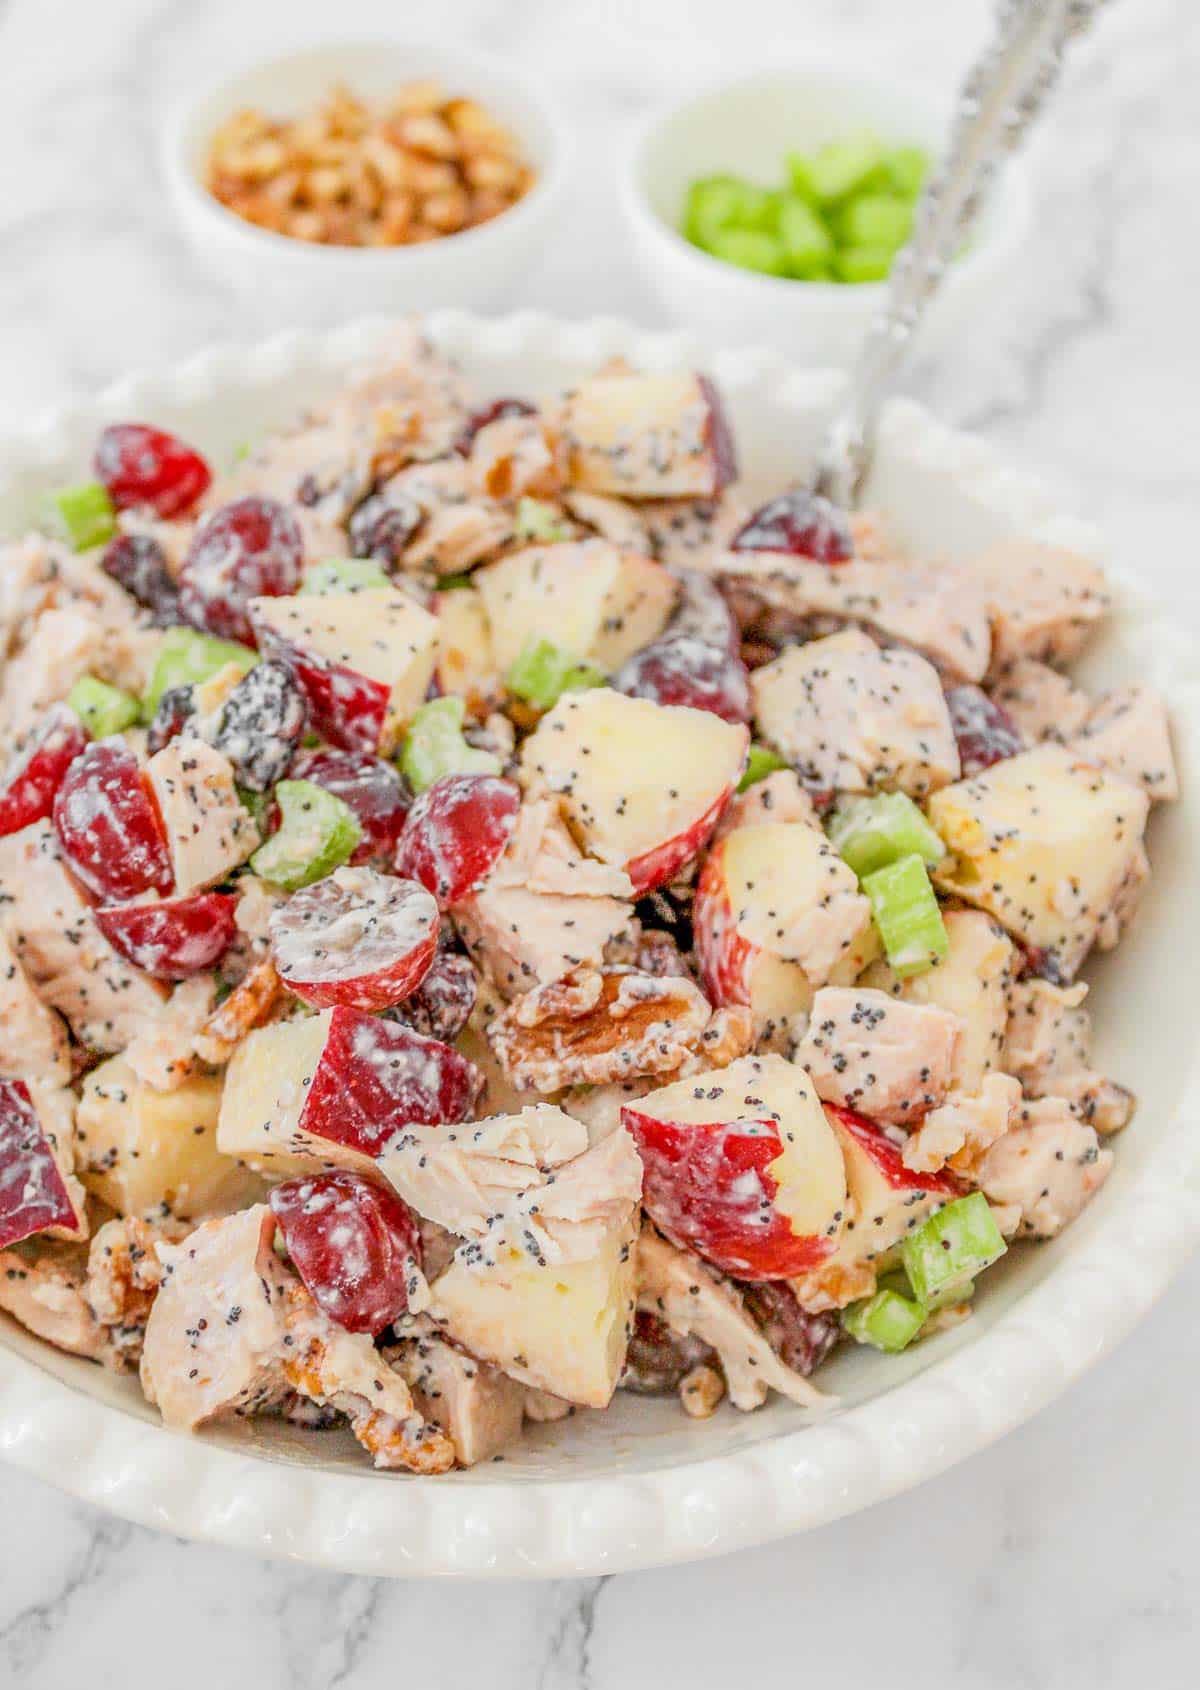 Chicken salad with grapes in a white bowl with fork inserted.